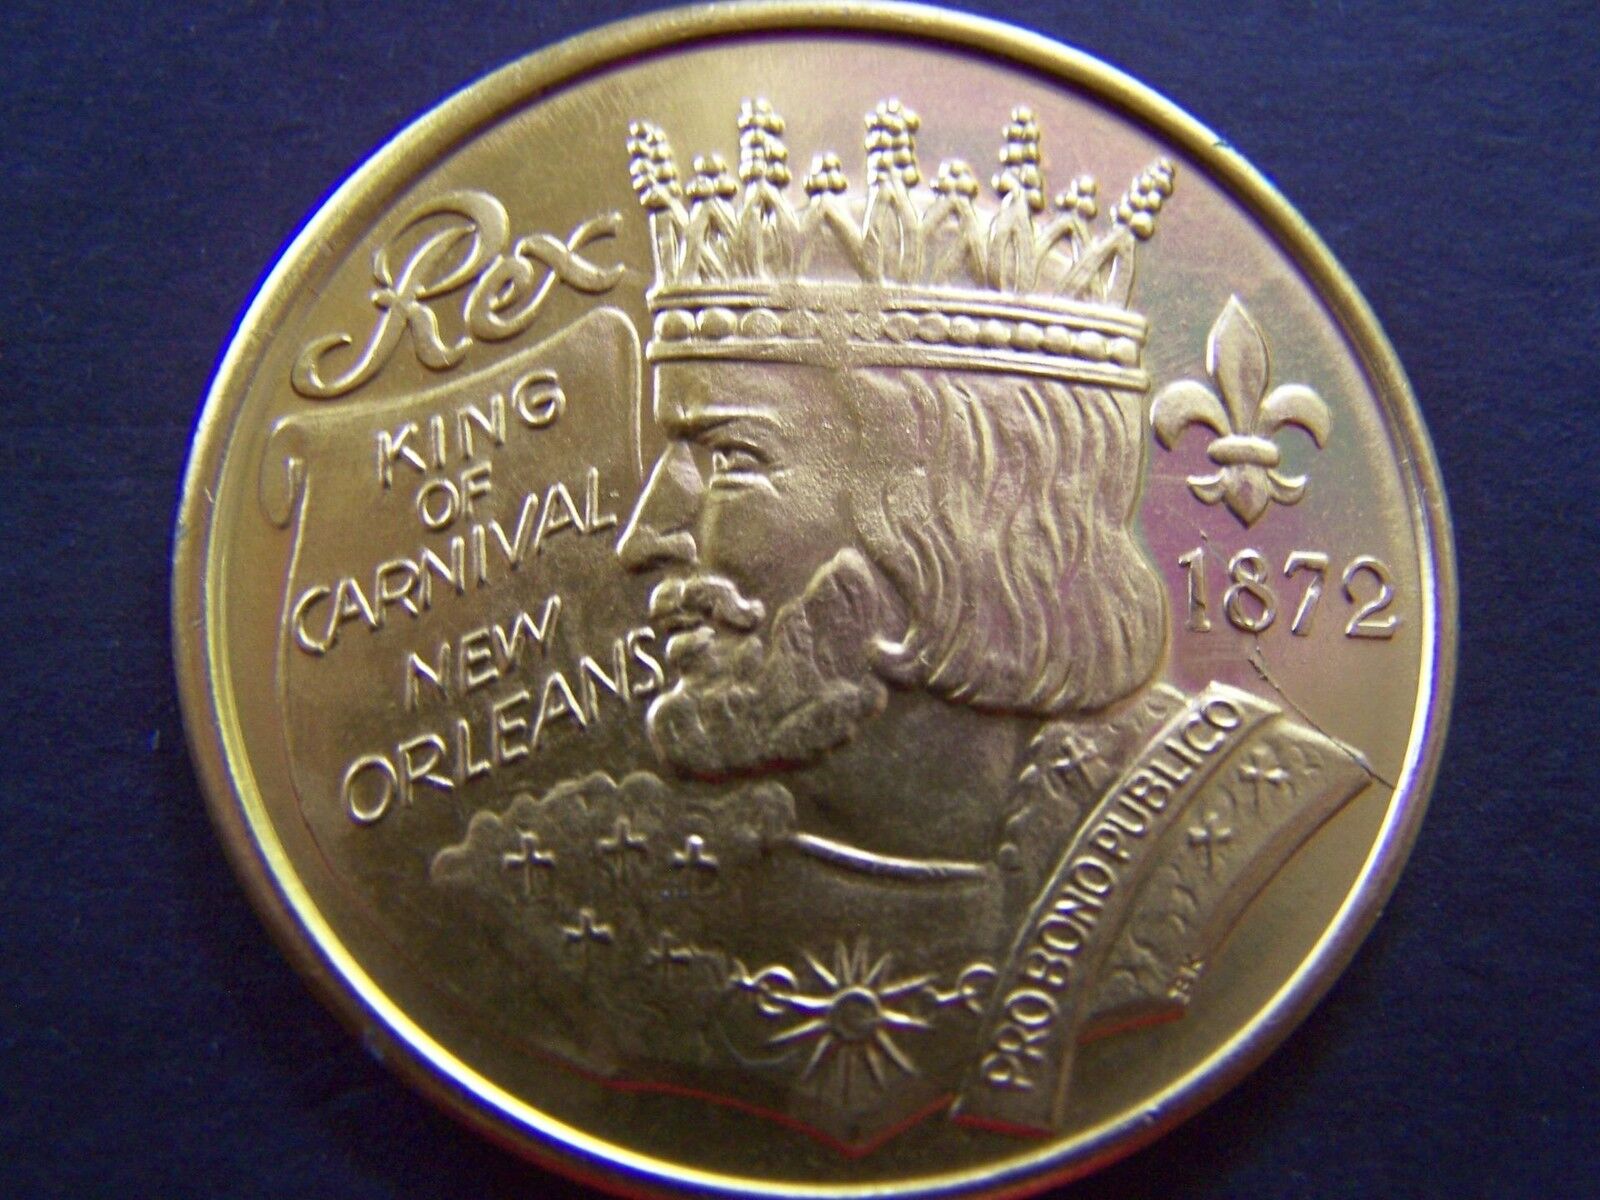 1968 Rex Dark Gold Aluminum Inverted Mardi Gras Doubloon-Clashed+Cracked Obv.